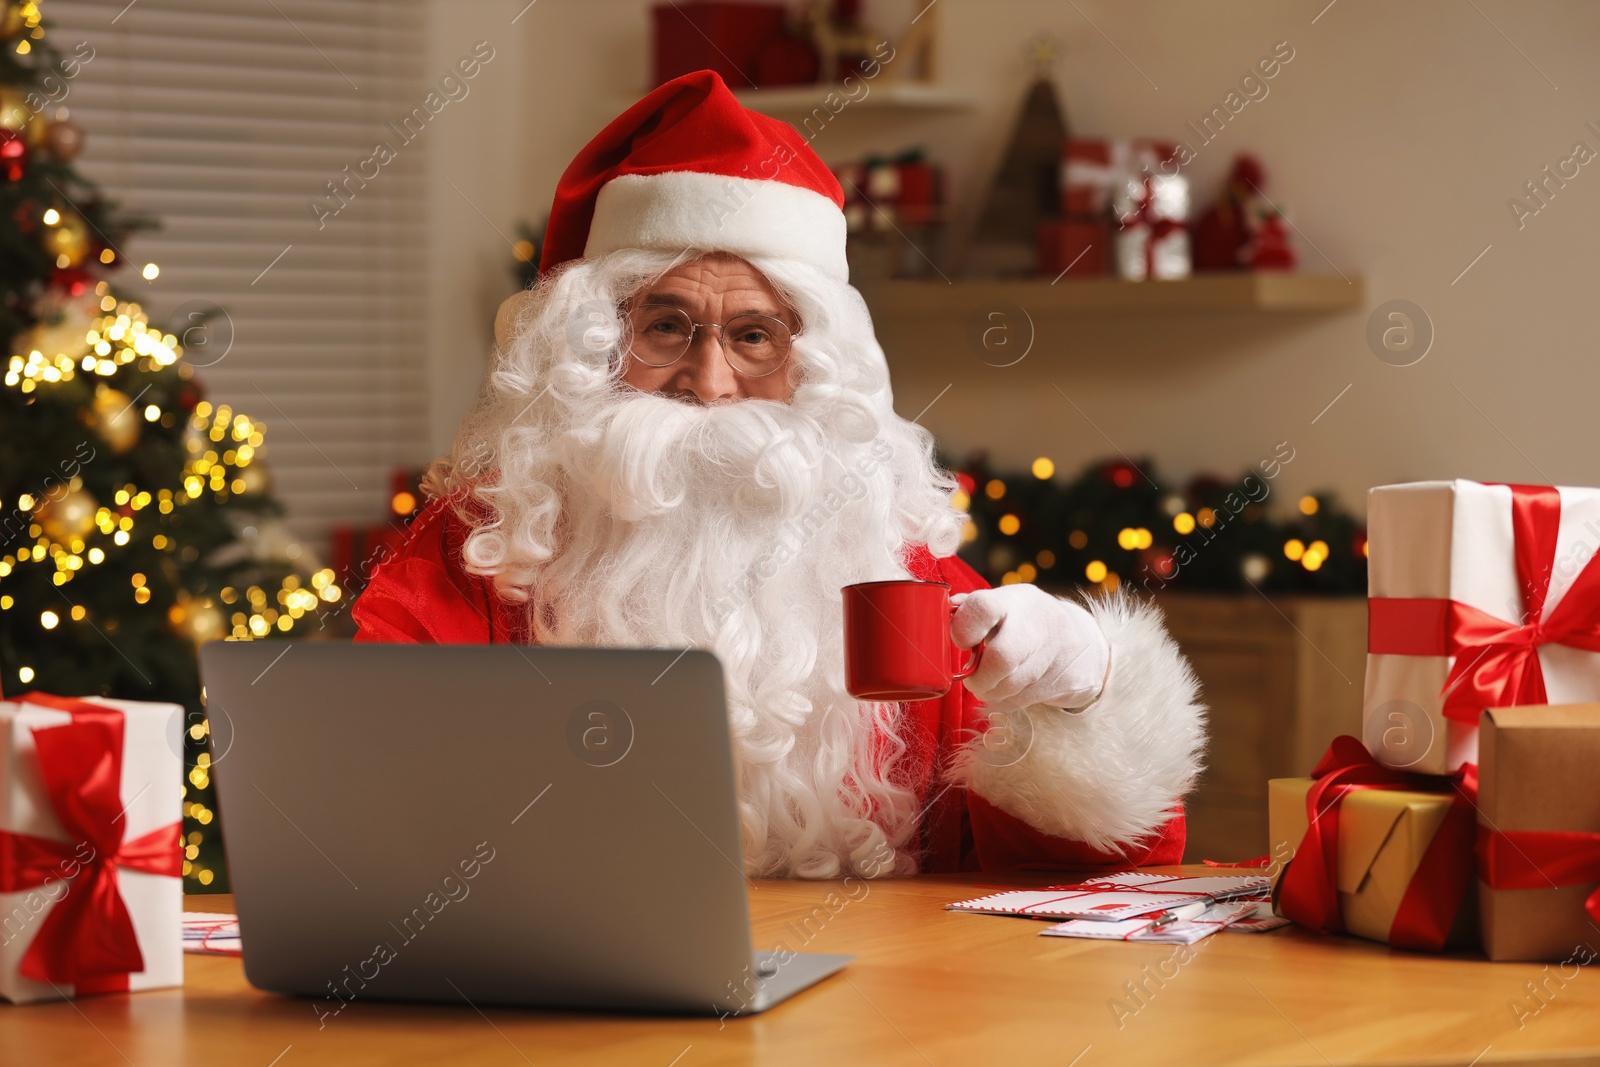 Photo of Santa Claus holding cup of drink using laptop at table with Christmas gifts in room